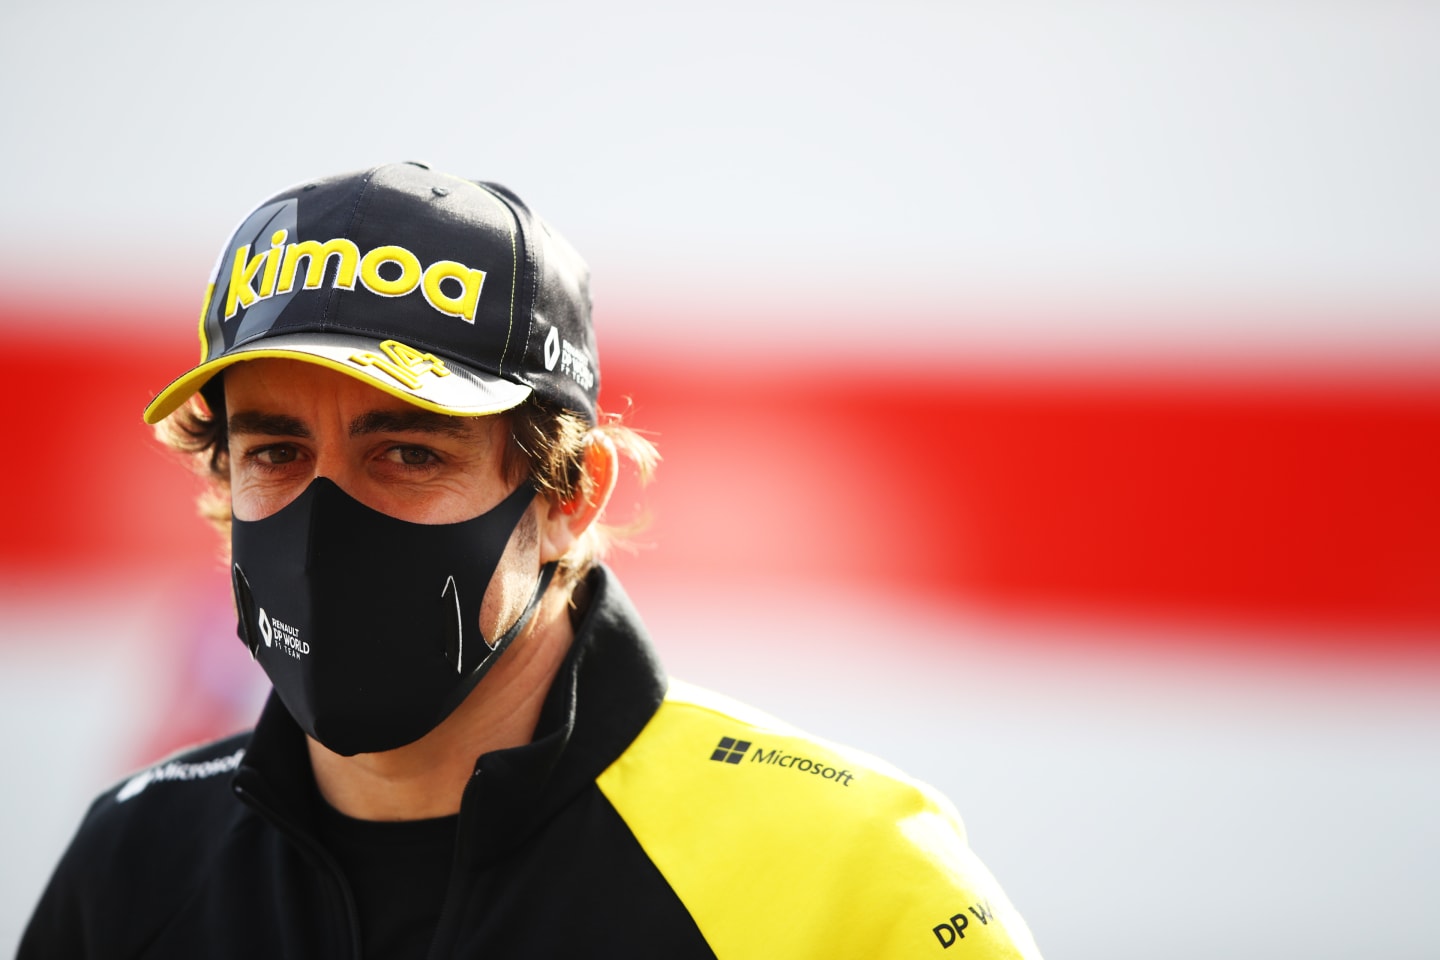 IMOLA, ITALY - OCTOBER 30: Fernando Alonso of Spain and Renault Sport F1 looks on in the Paddock